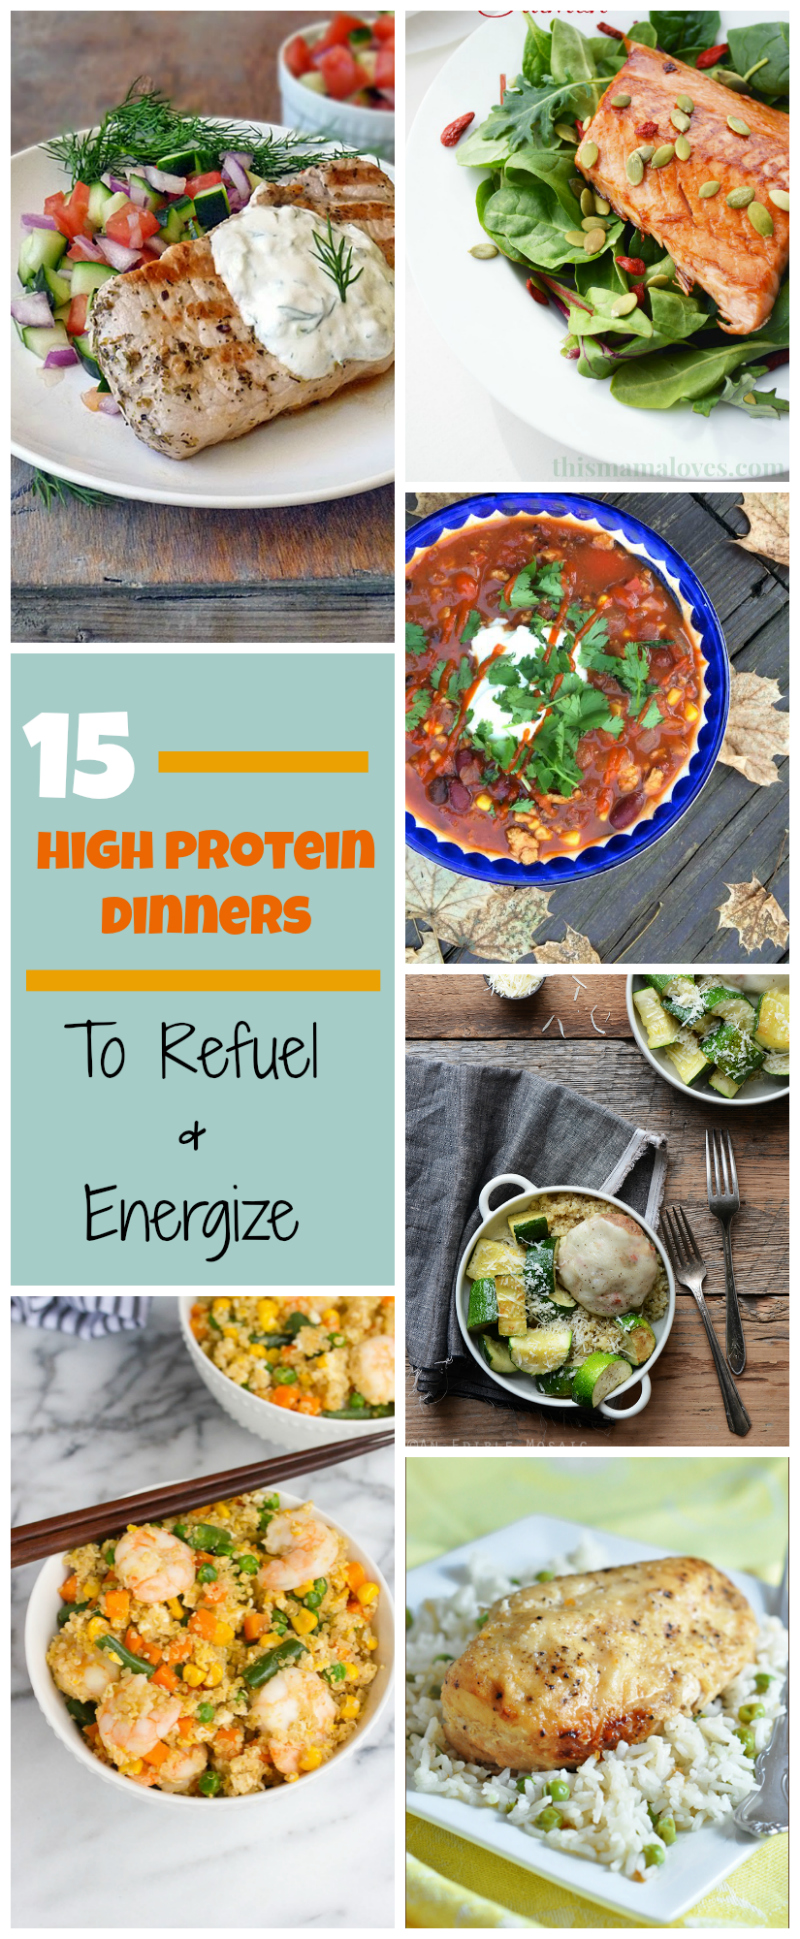 15 High Protein Dinner Recipes that are great for refueling and energizing after an intense workout. Chicken recipes, beans, fish and many recipes that will help you get lean and stay healthy.